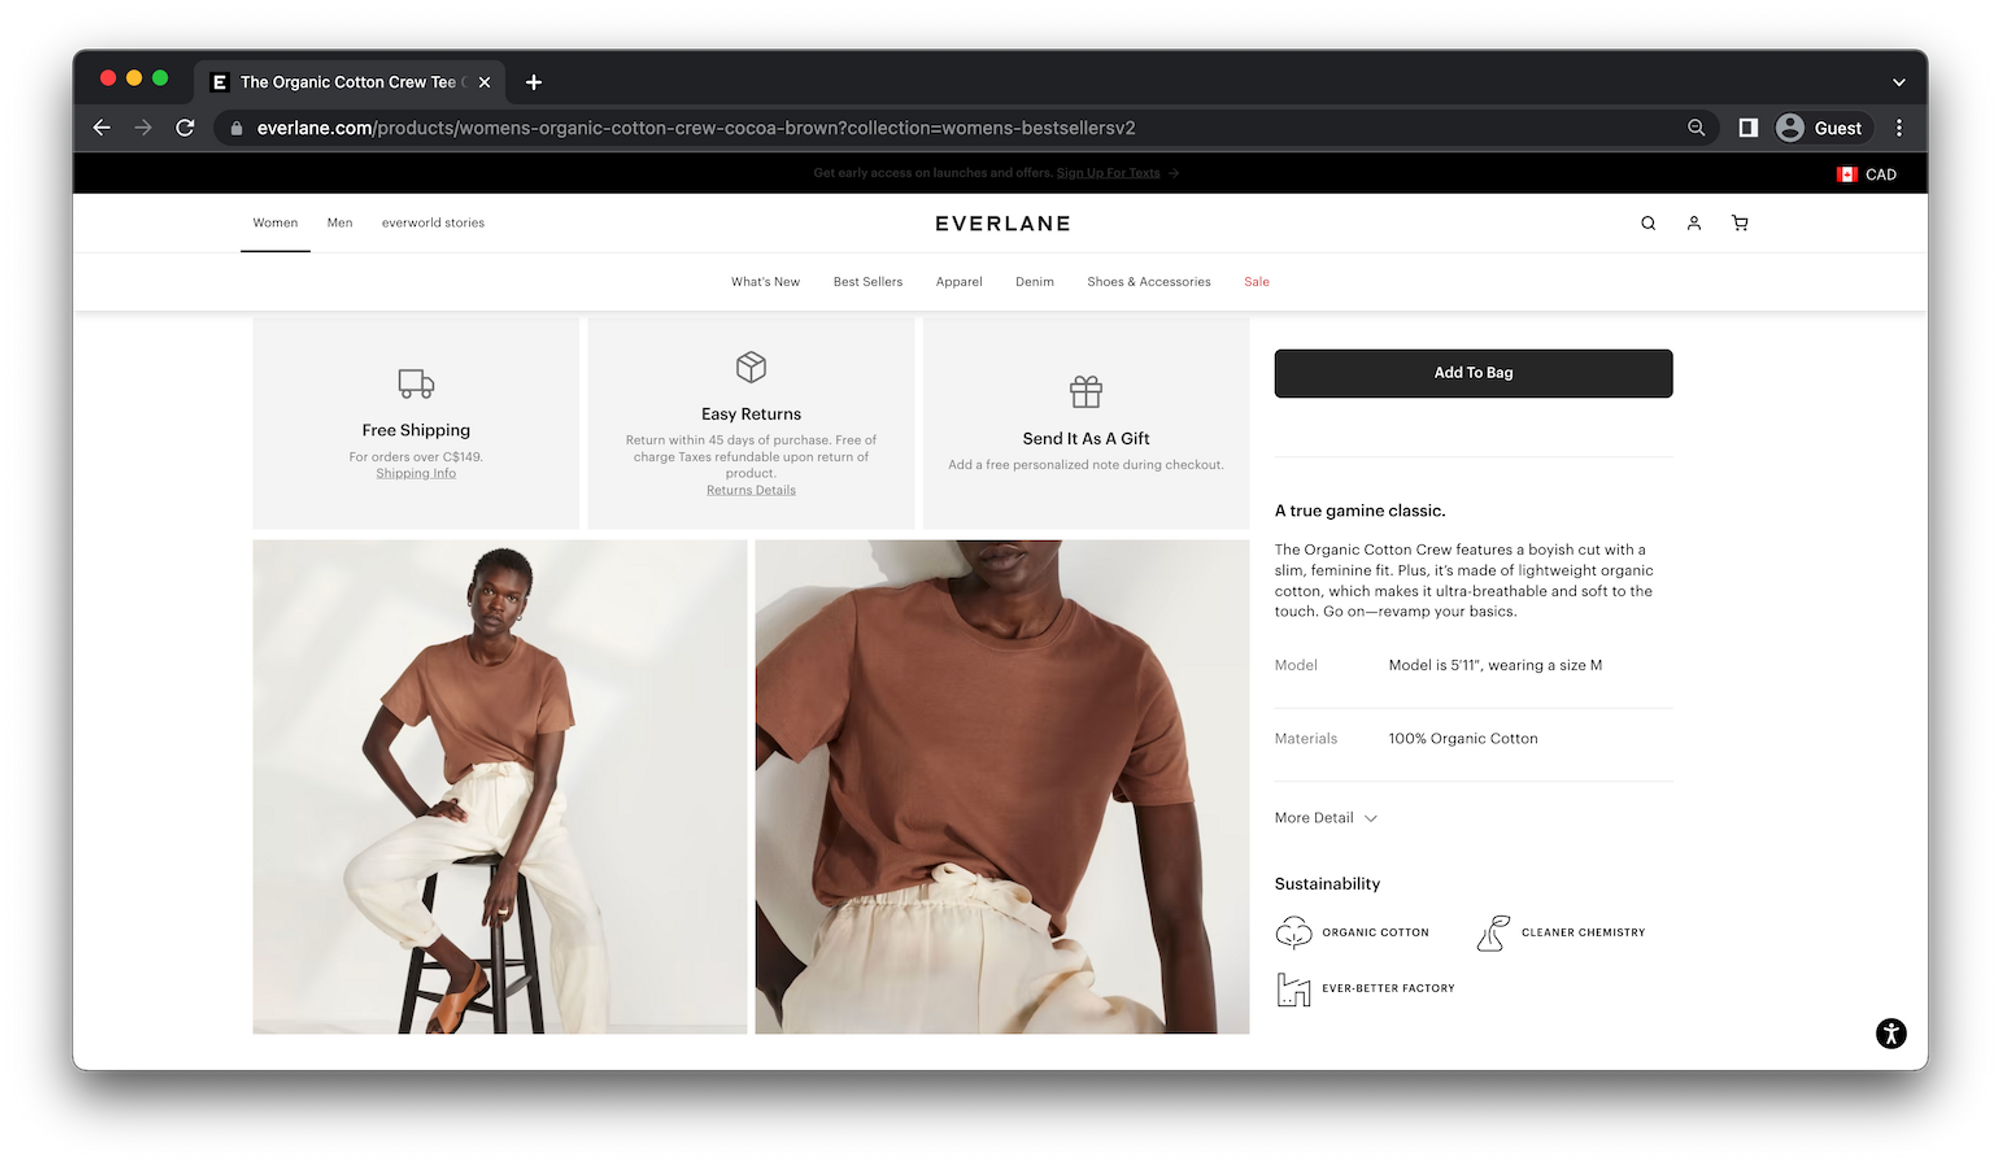 Everlane sustainability information on product pages